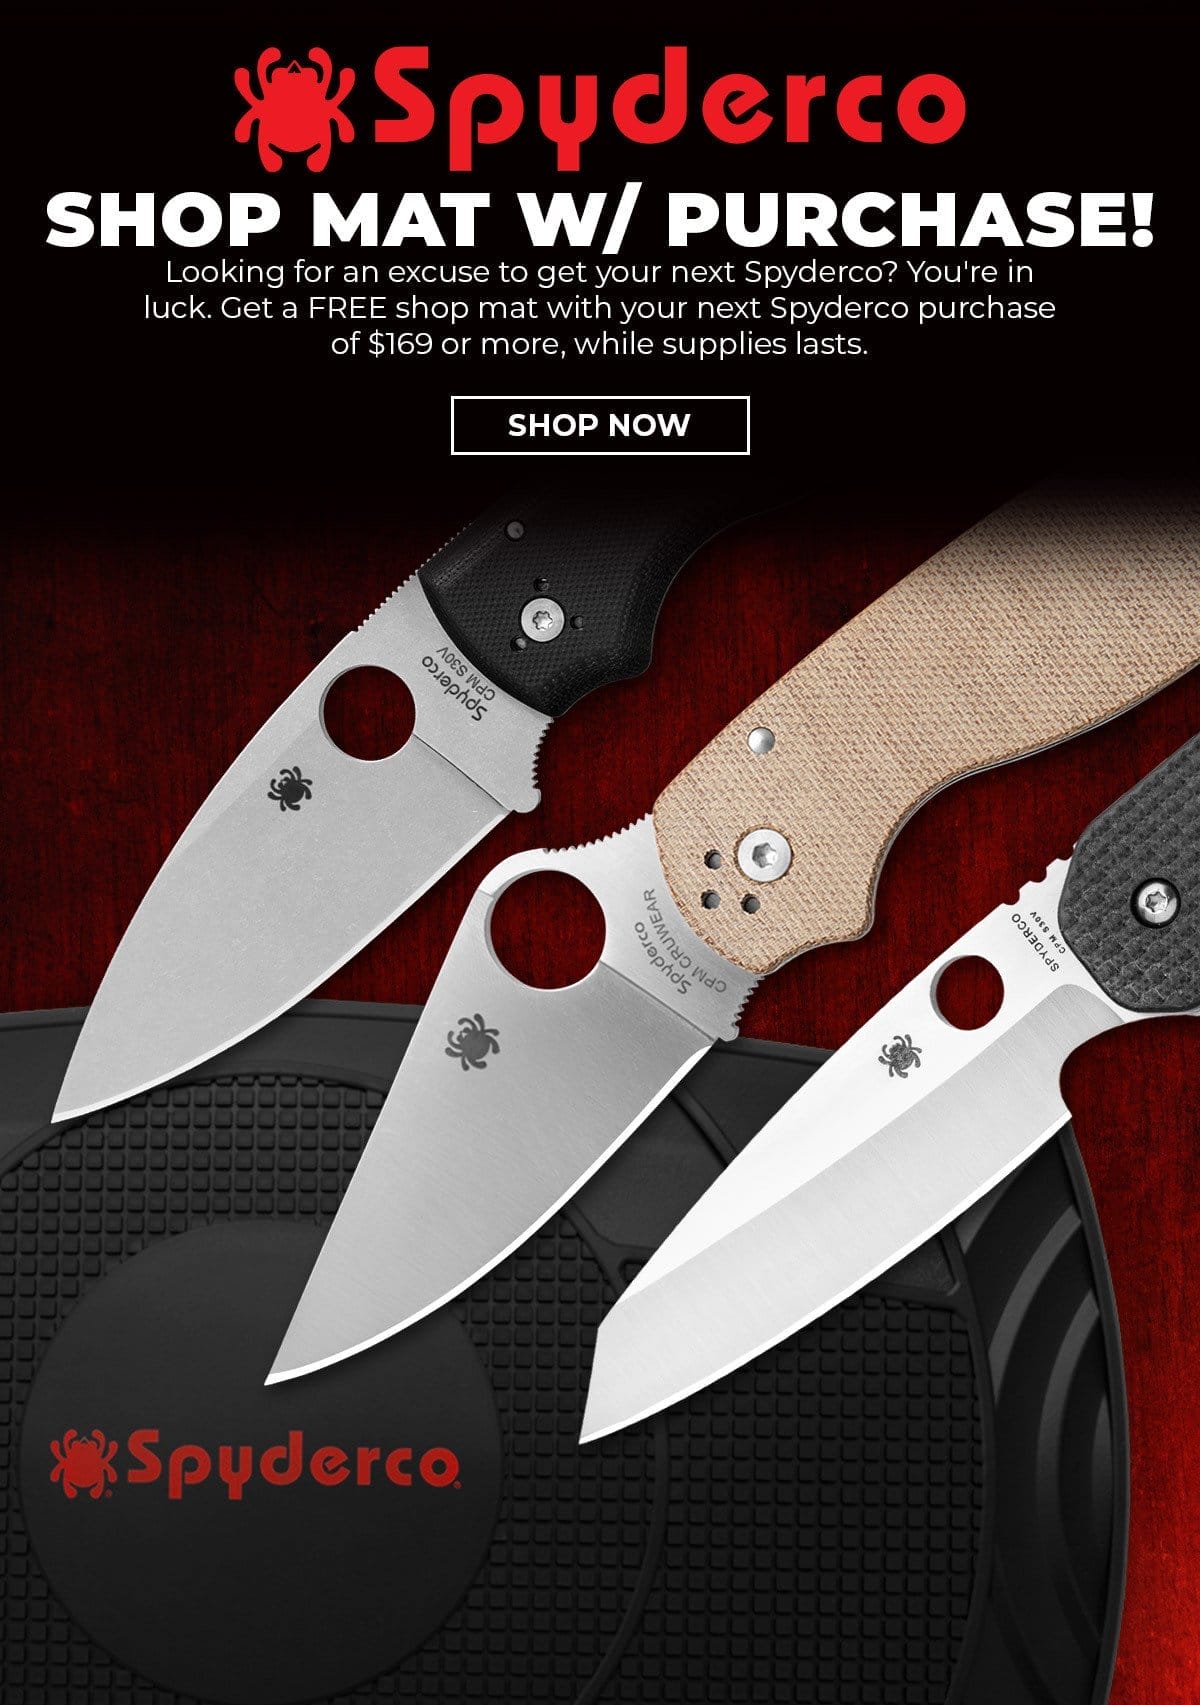 FREE shop mat w/ Spyderco purchases \\$150+